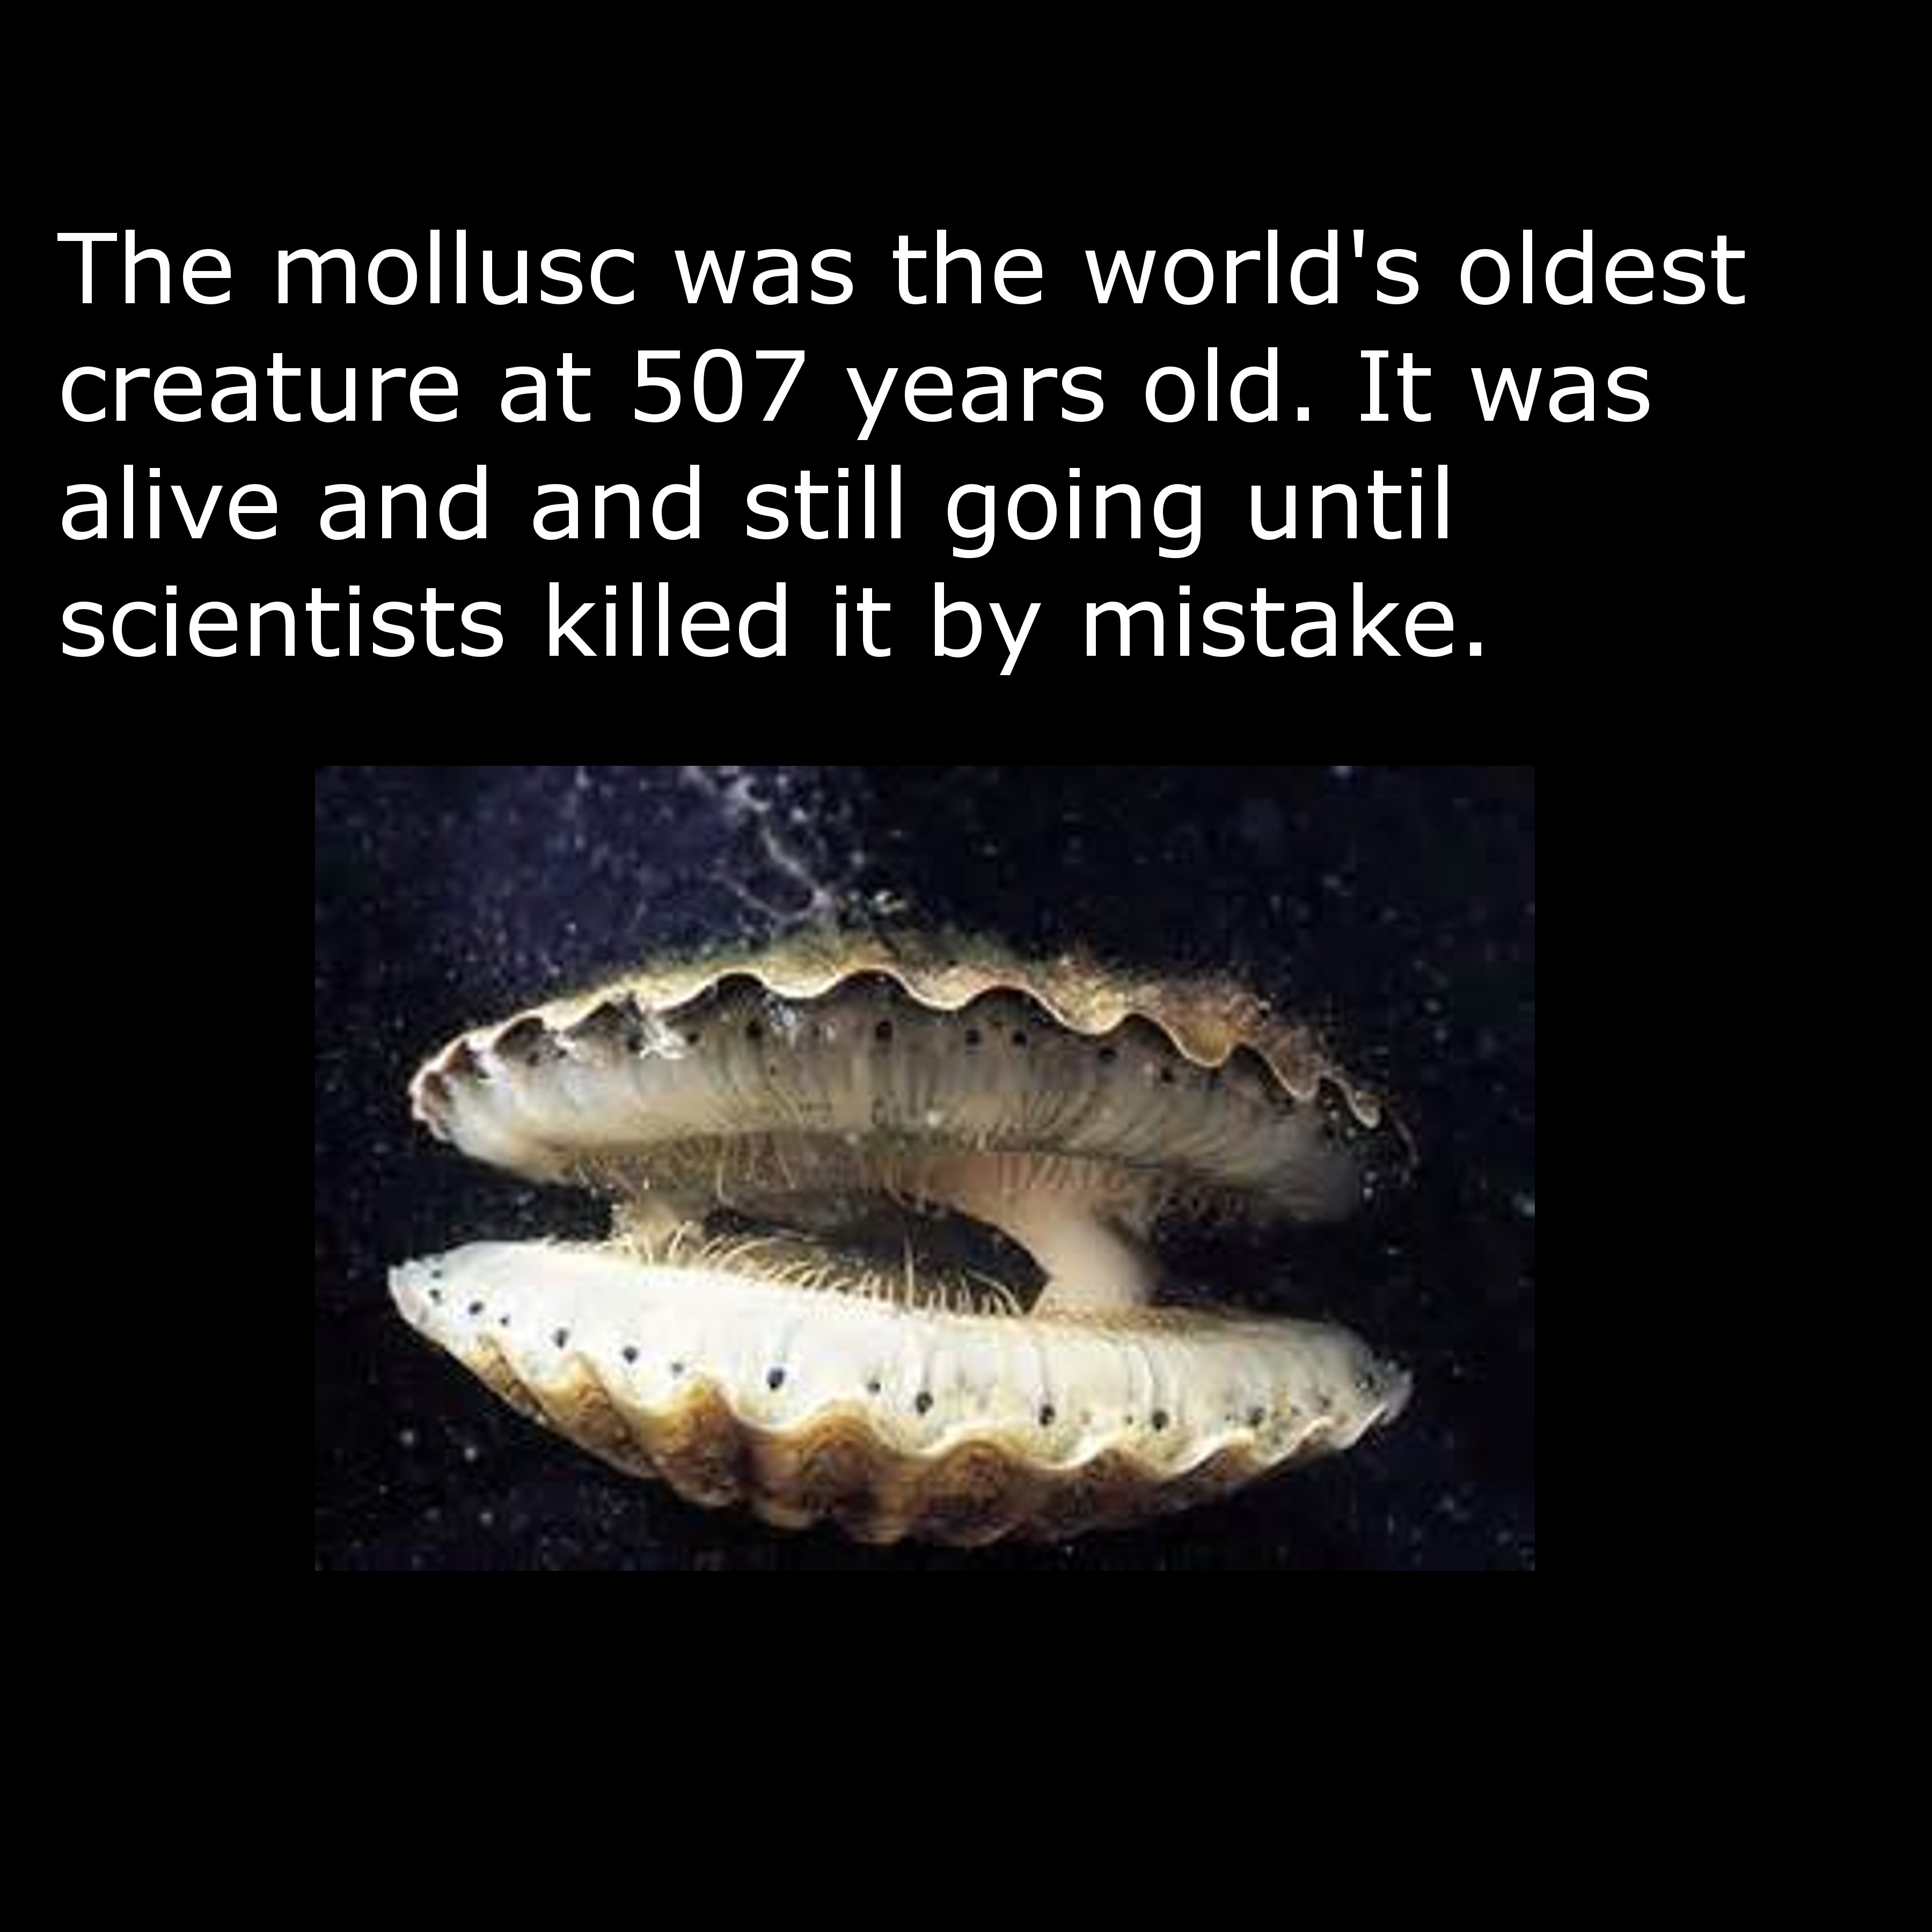 bivalvia - The mollusc was the world's oldest creature at 507 years old. It was alive and and still going until scientists killed it by mistake.